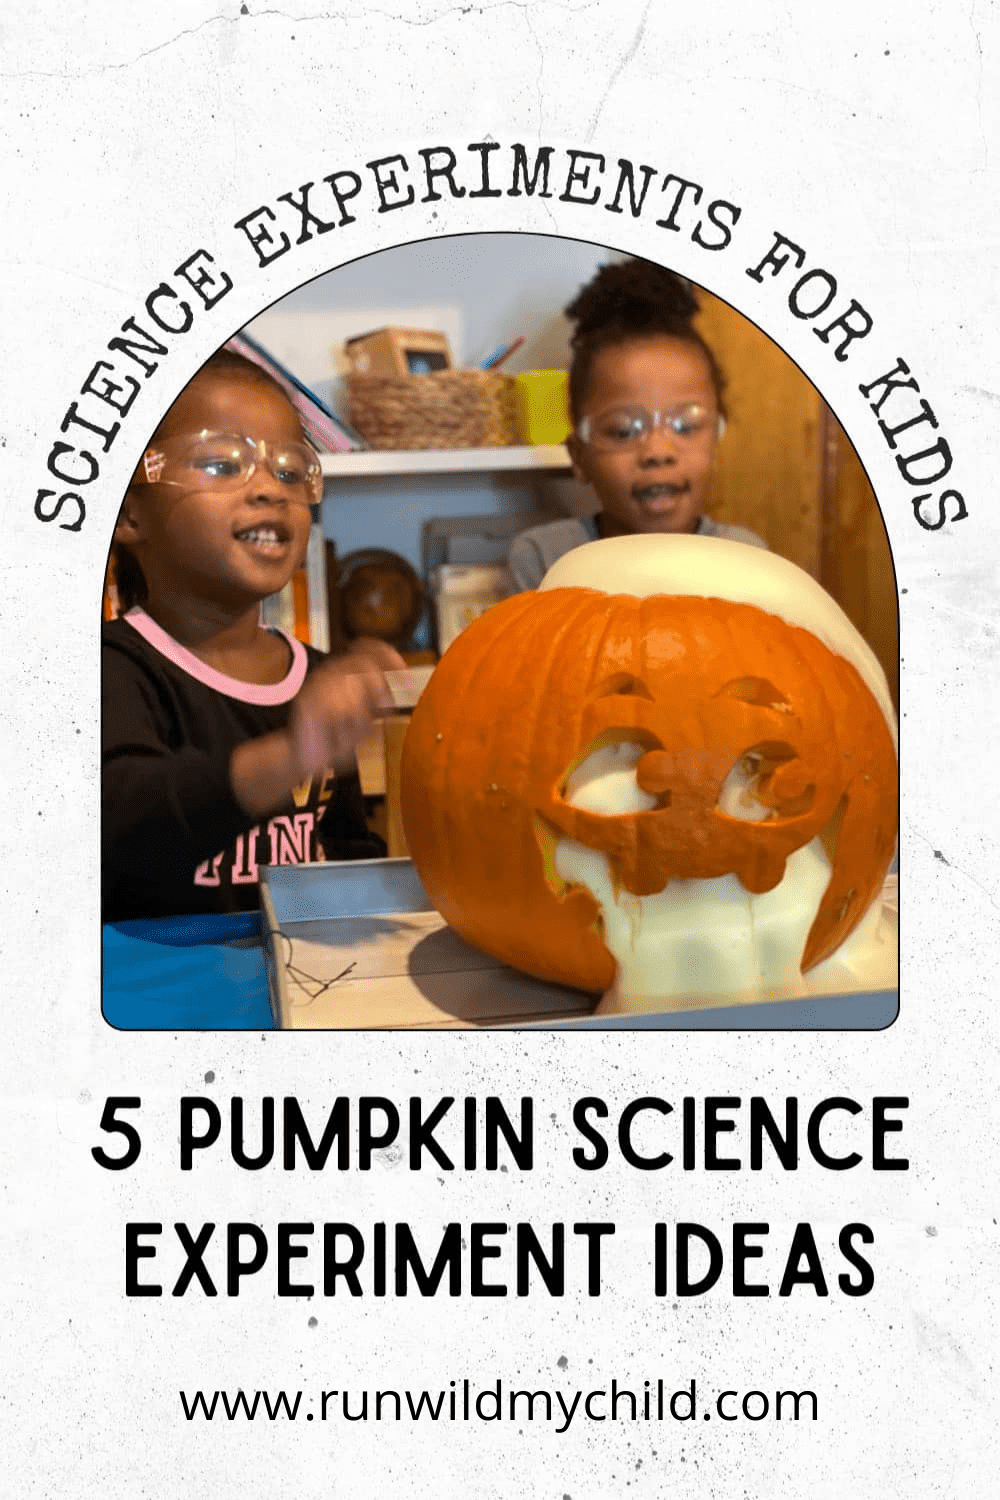 Pumpkin Science Experiments for Kids